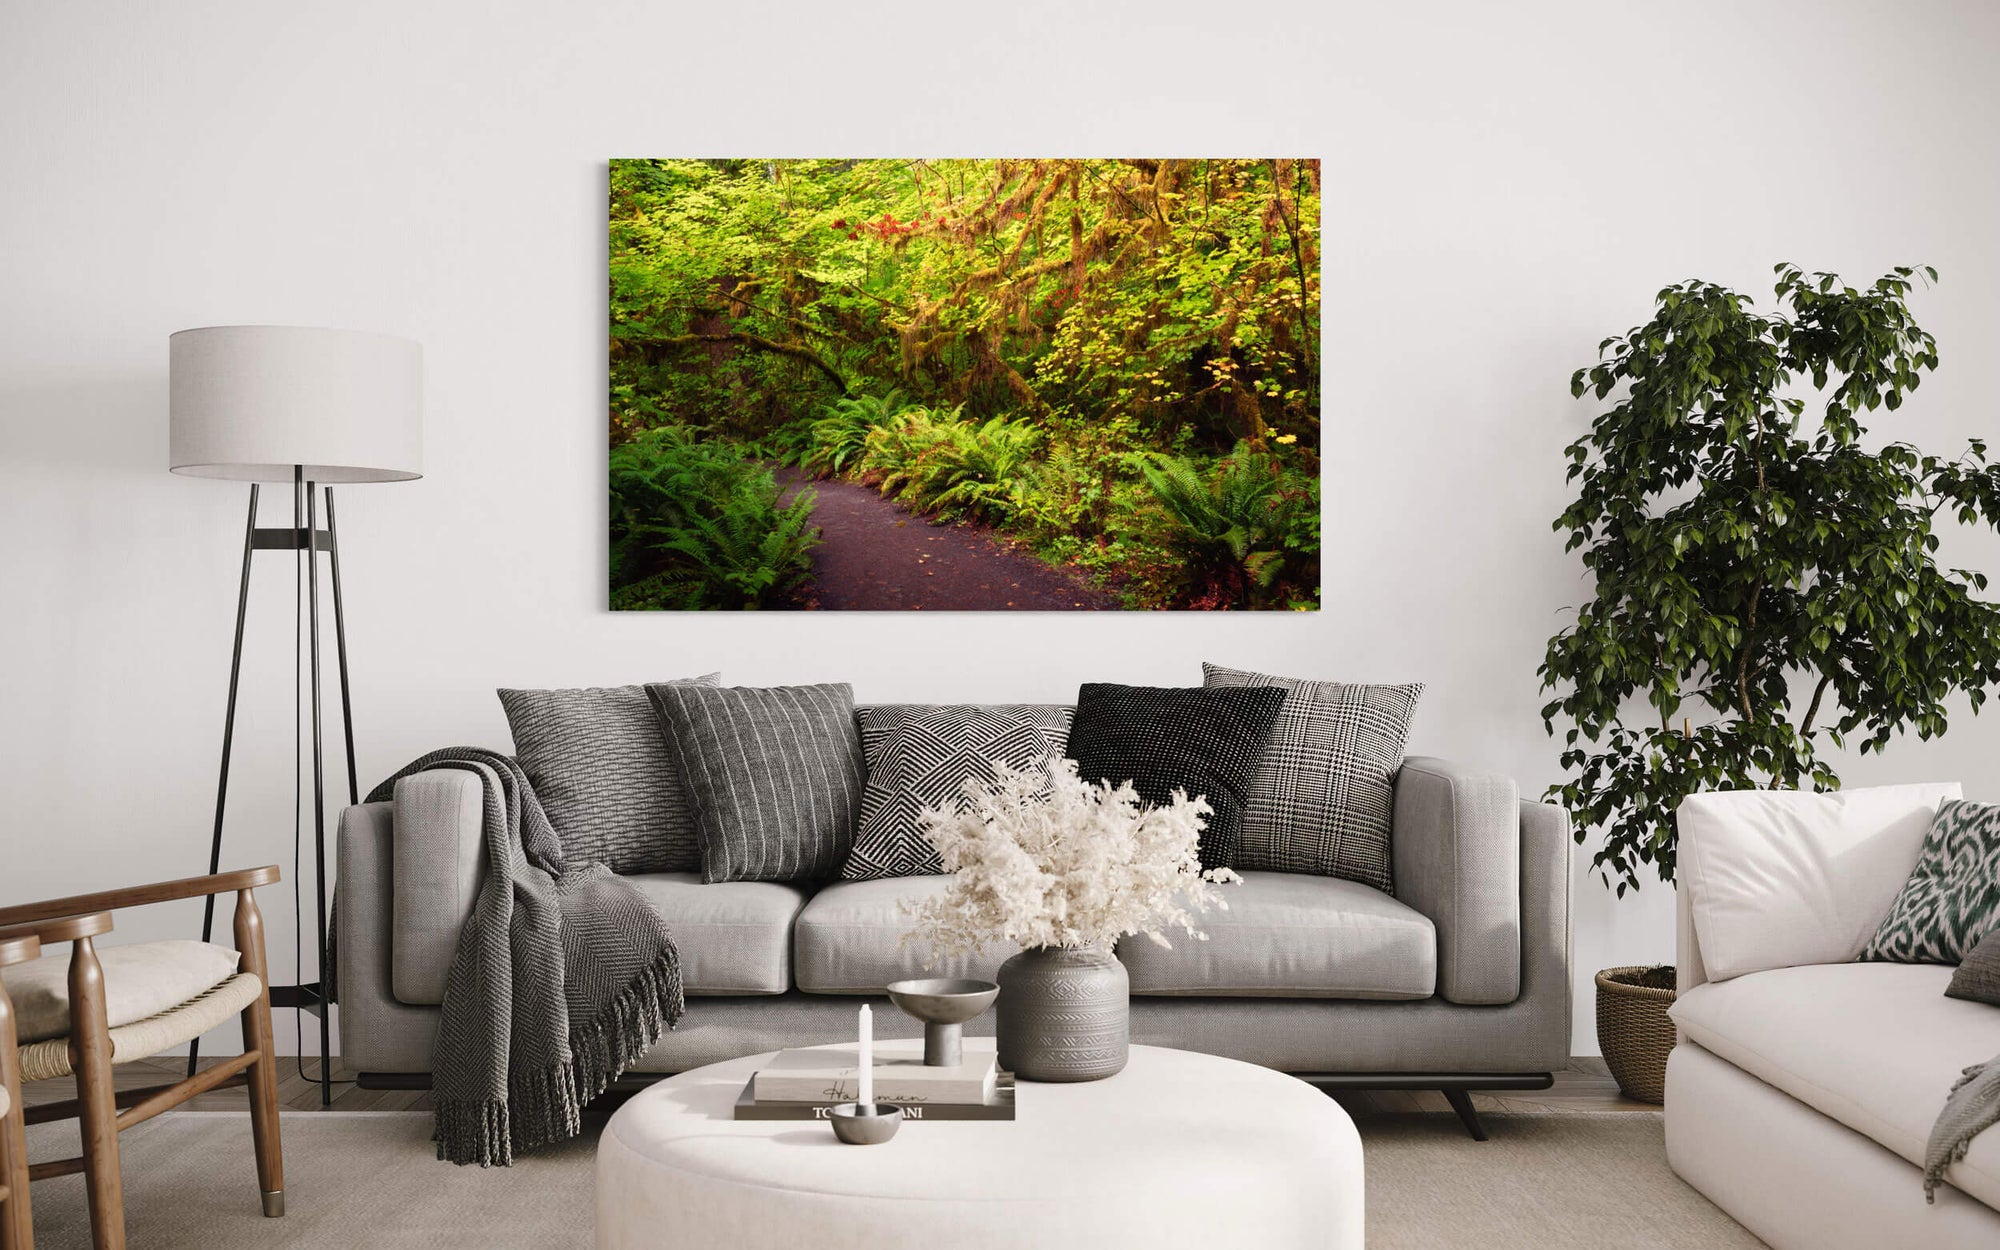 A Hoh Rainforest picture taken on an Olympic National Park hike hangs in a living room.